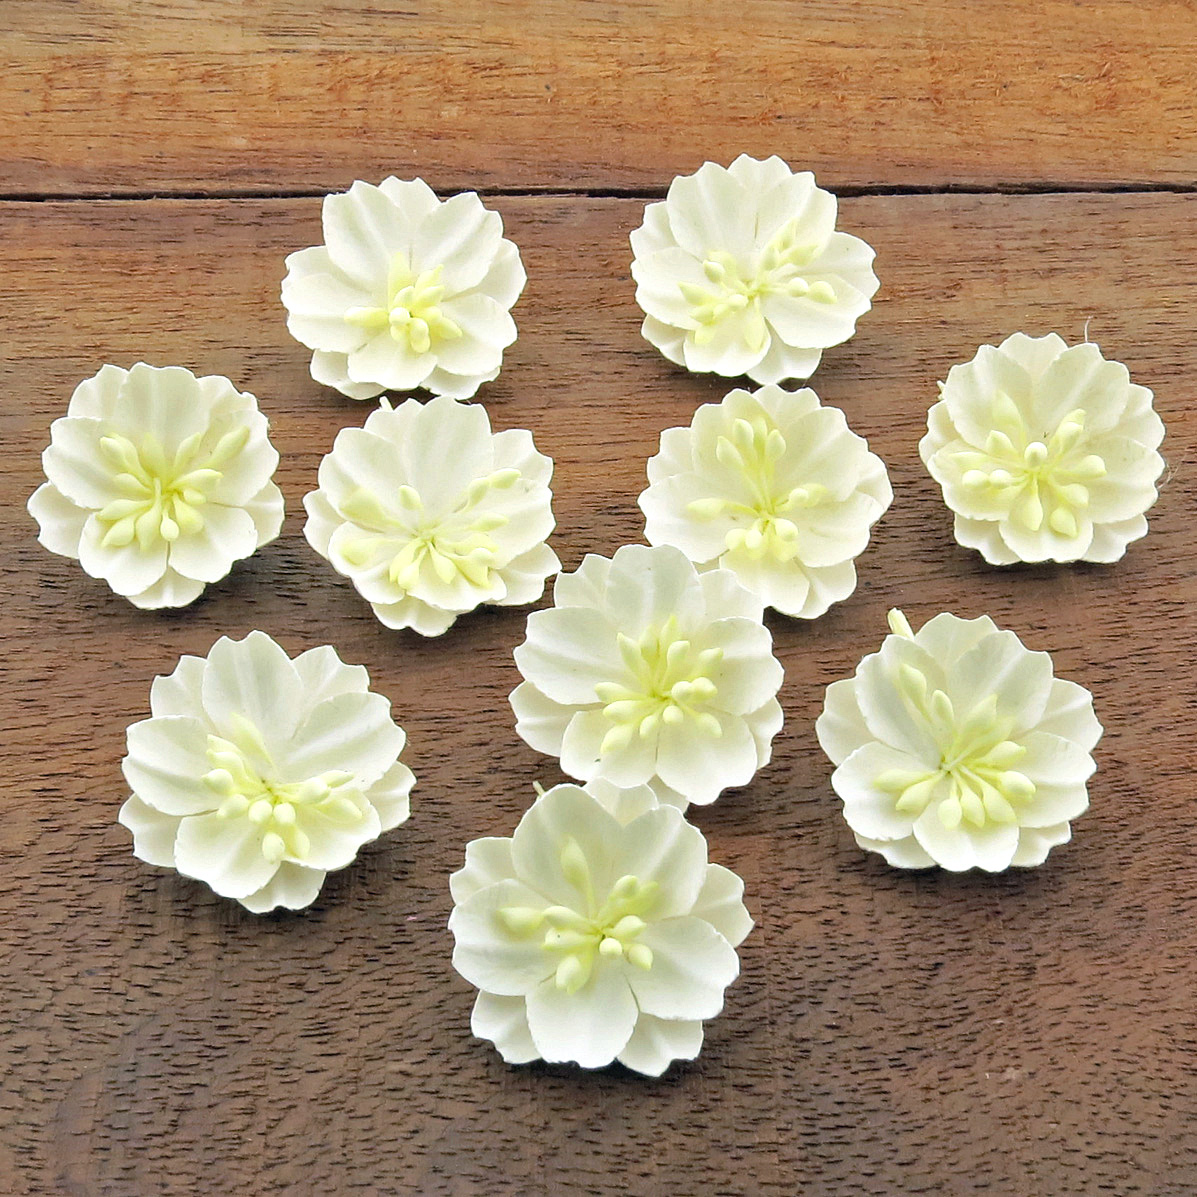 WHITE COTTON STEM MULBERRY PAPER FLOWERS - SET A